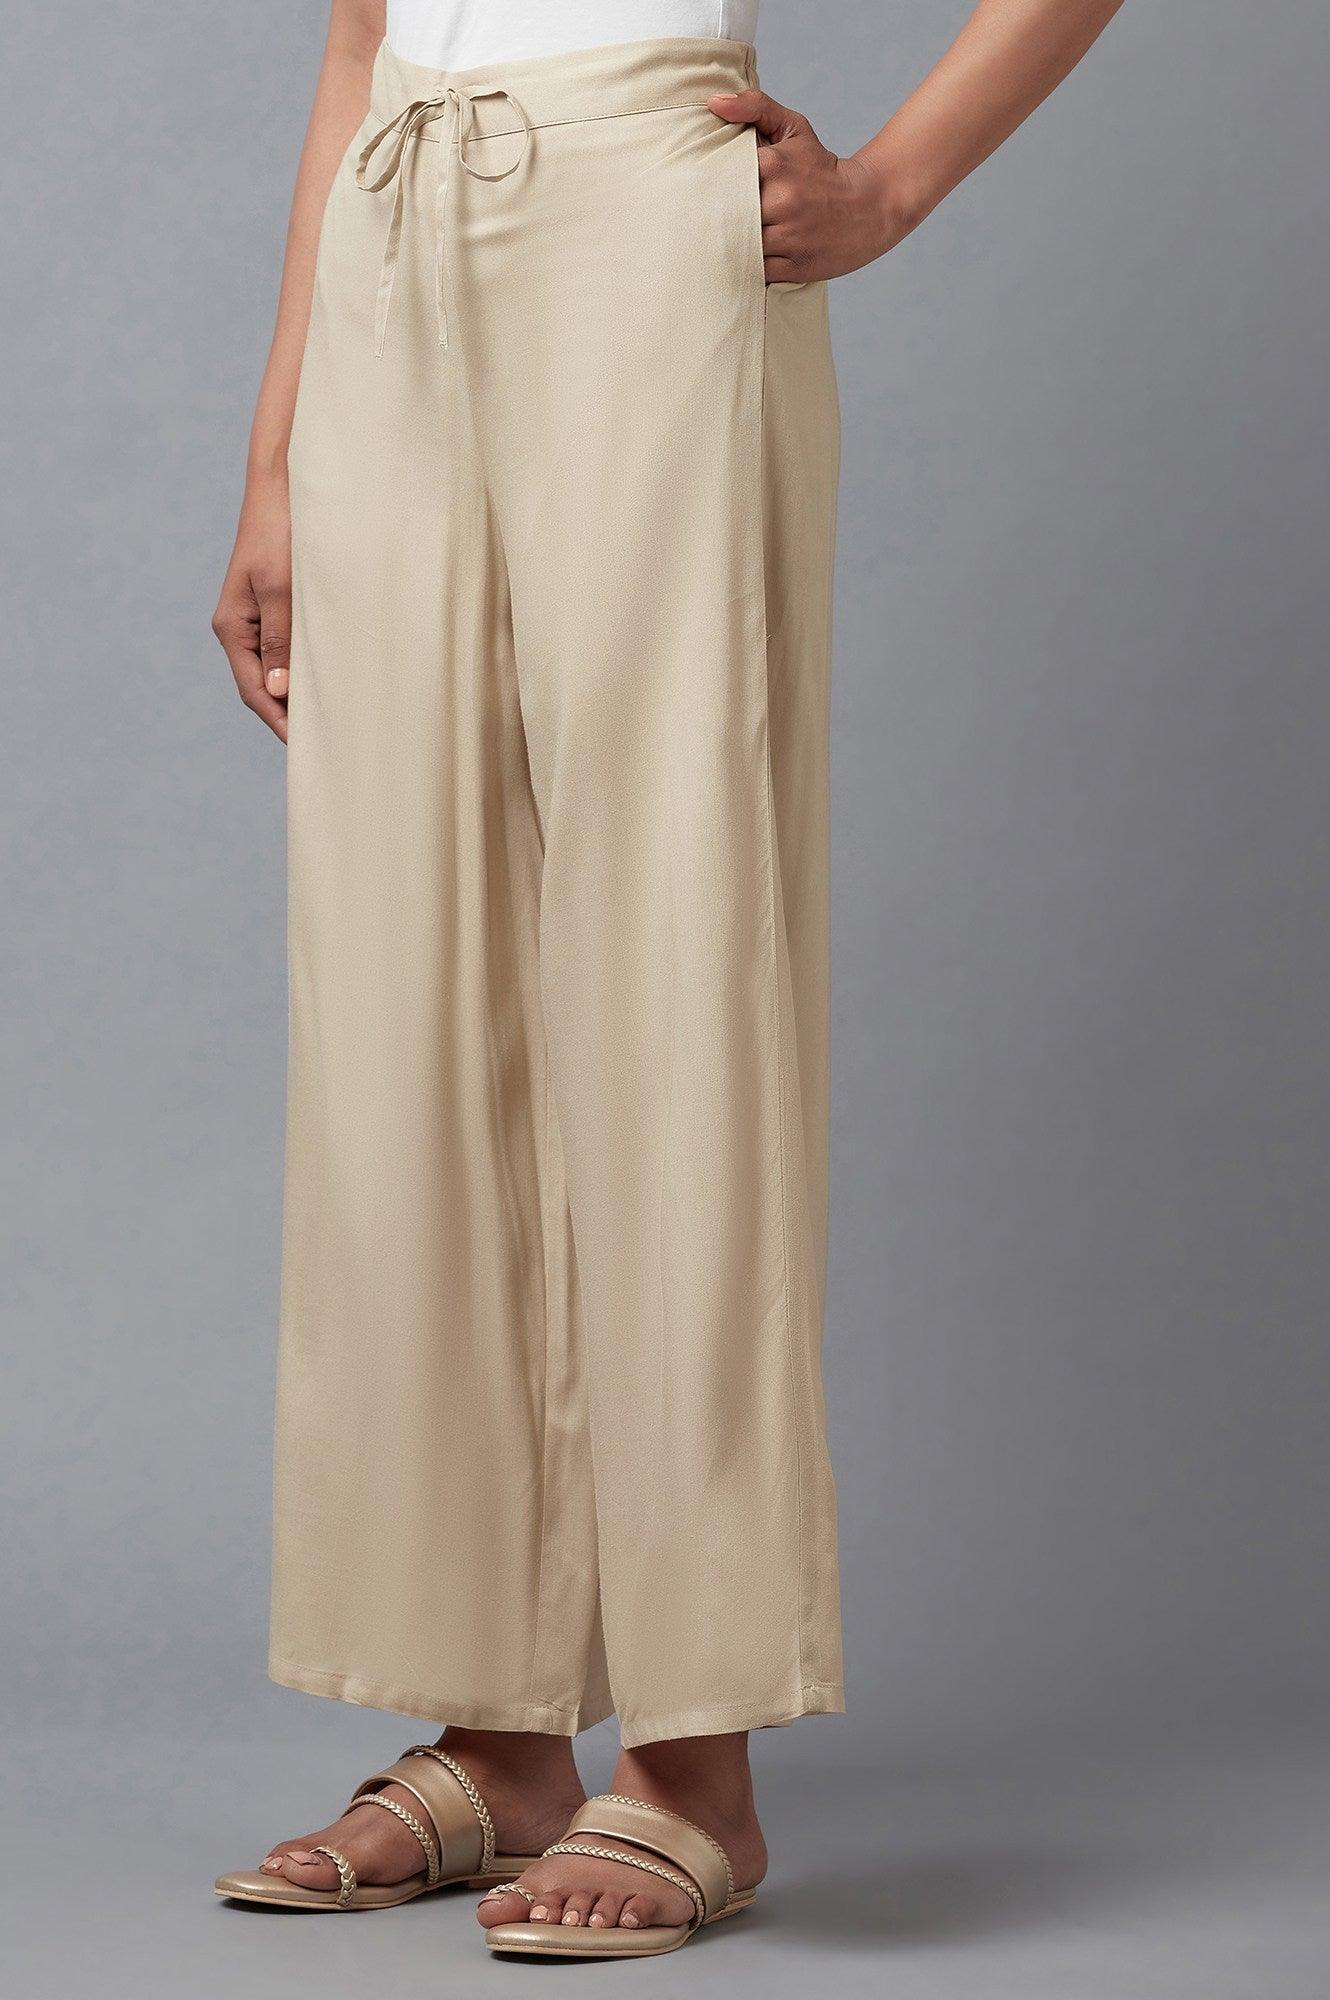 Beige Straight Silhouette Flared Pants - wforwoman